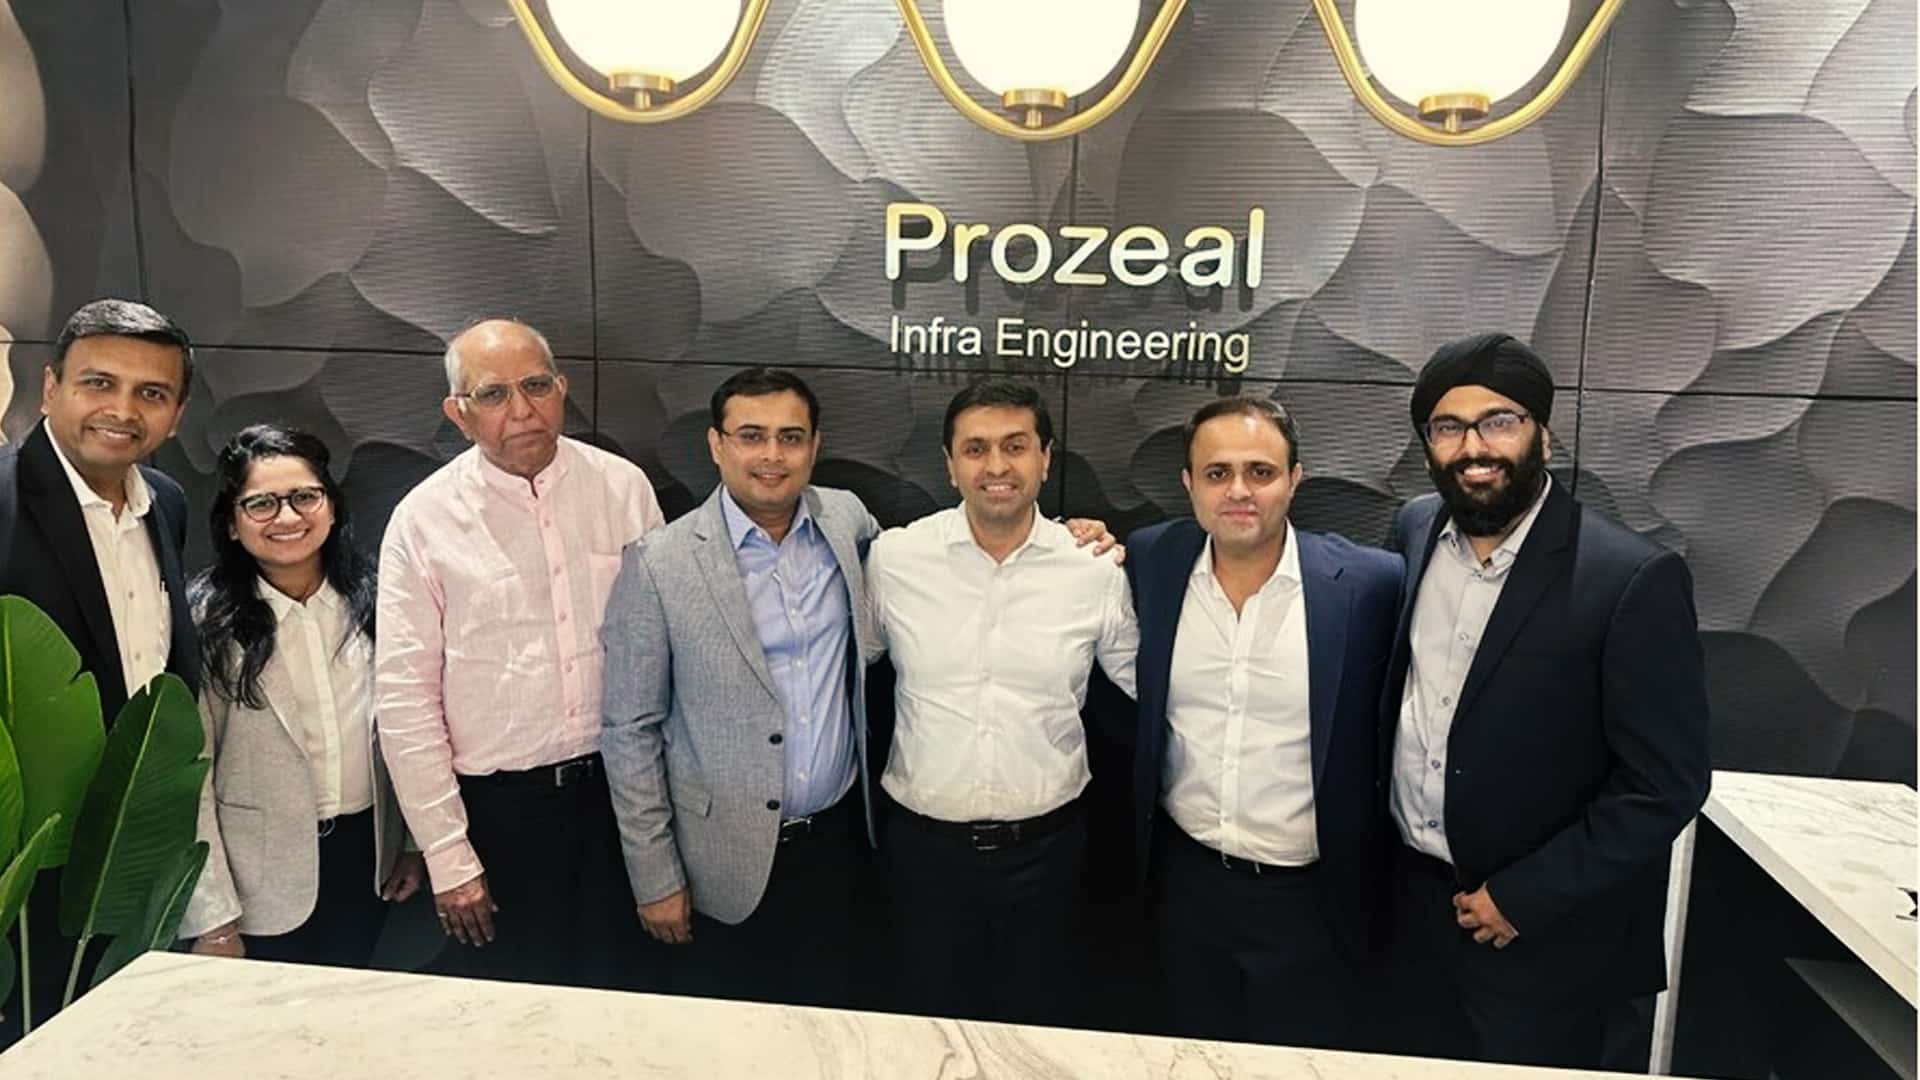 Chandrakant Gogri's family office leads a $4 Million Series A investment in Prozeal Infra